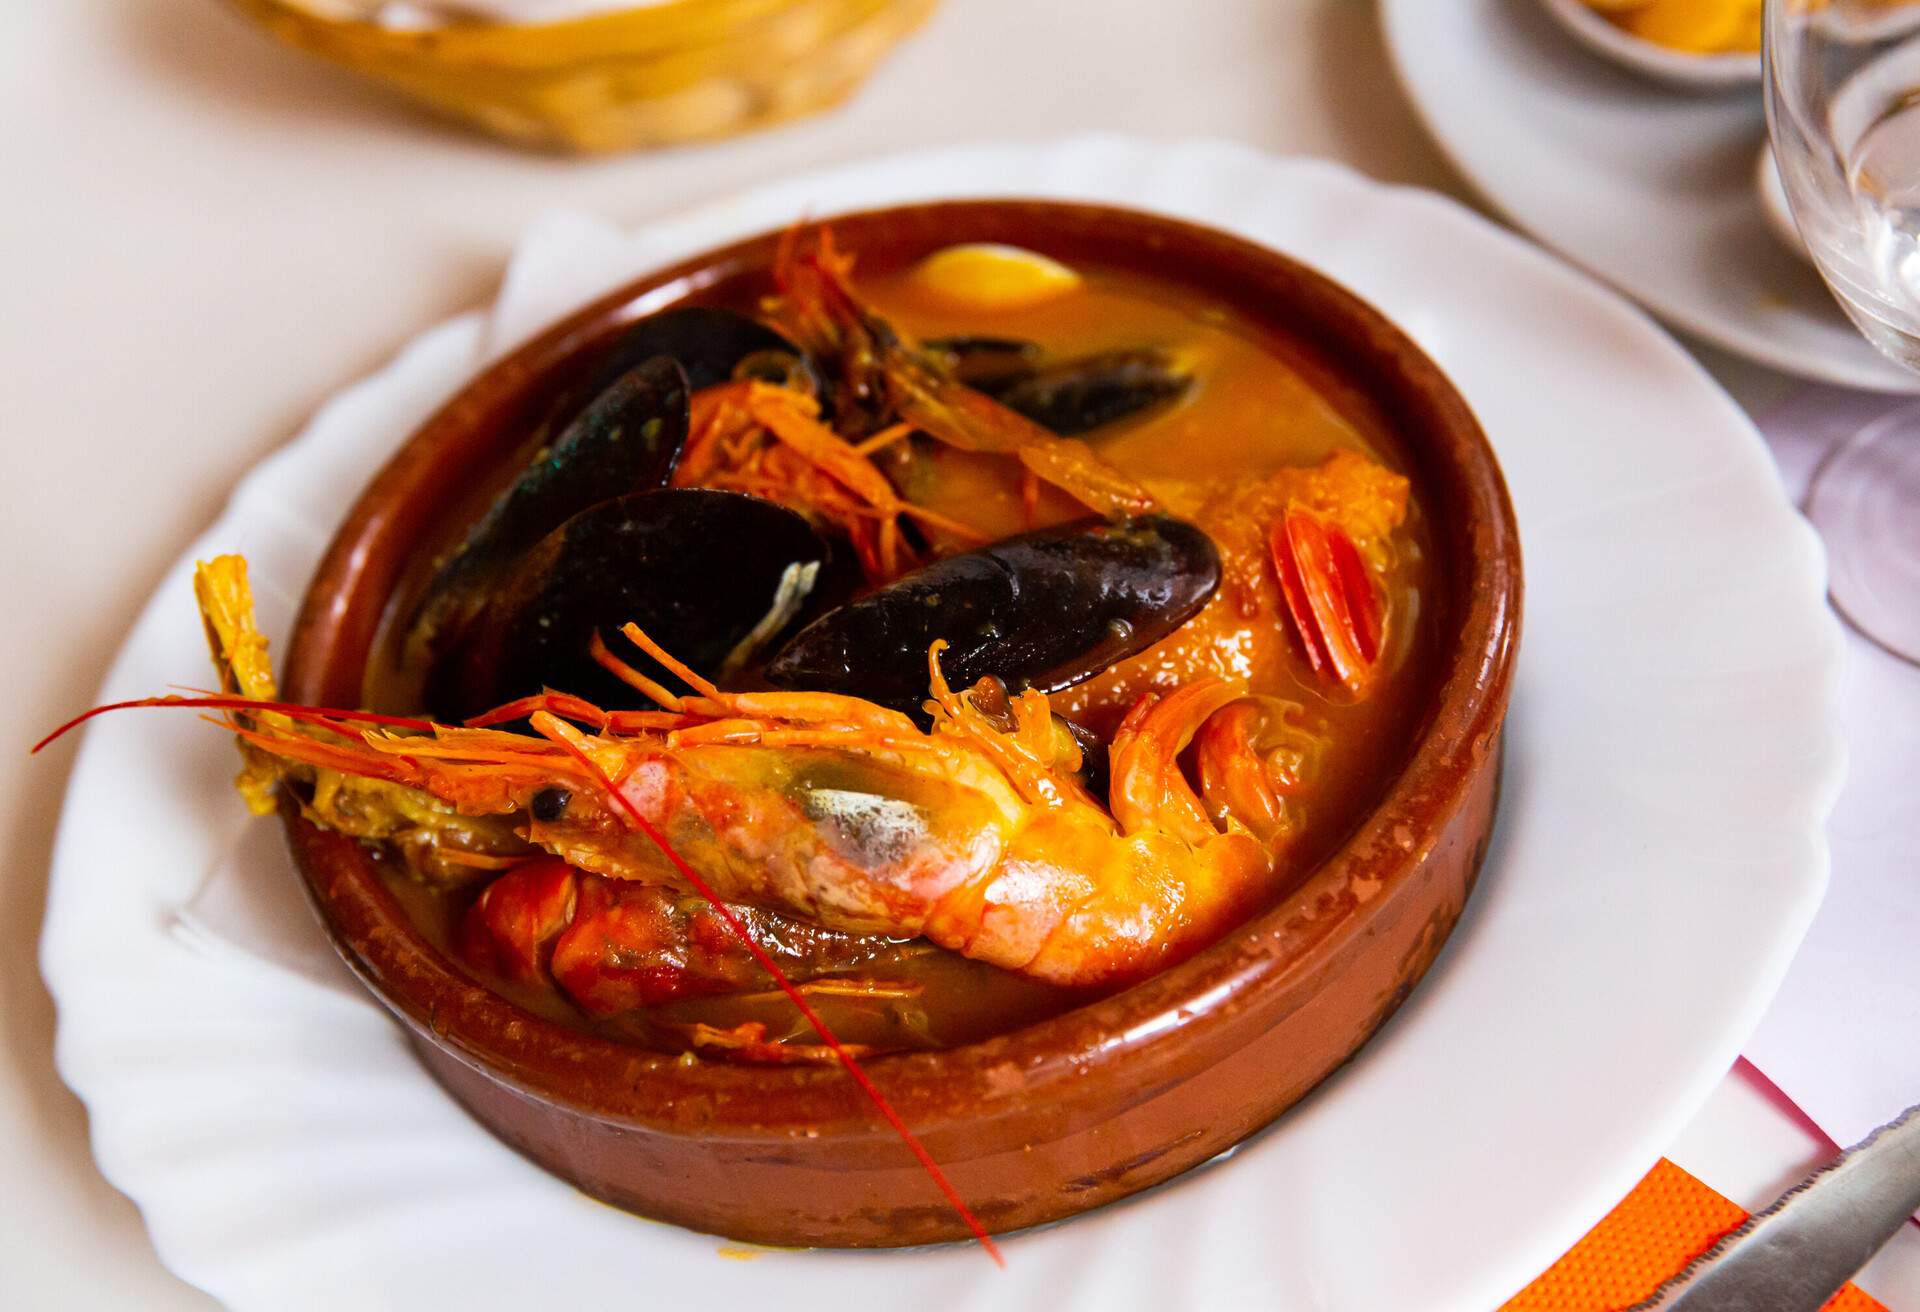 Typical homemade Catalan salsa suquet - thick seafood stew with shrimps and mussels traditionally served in clay bowl